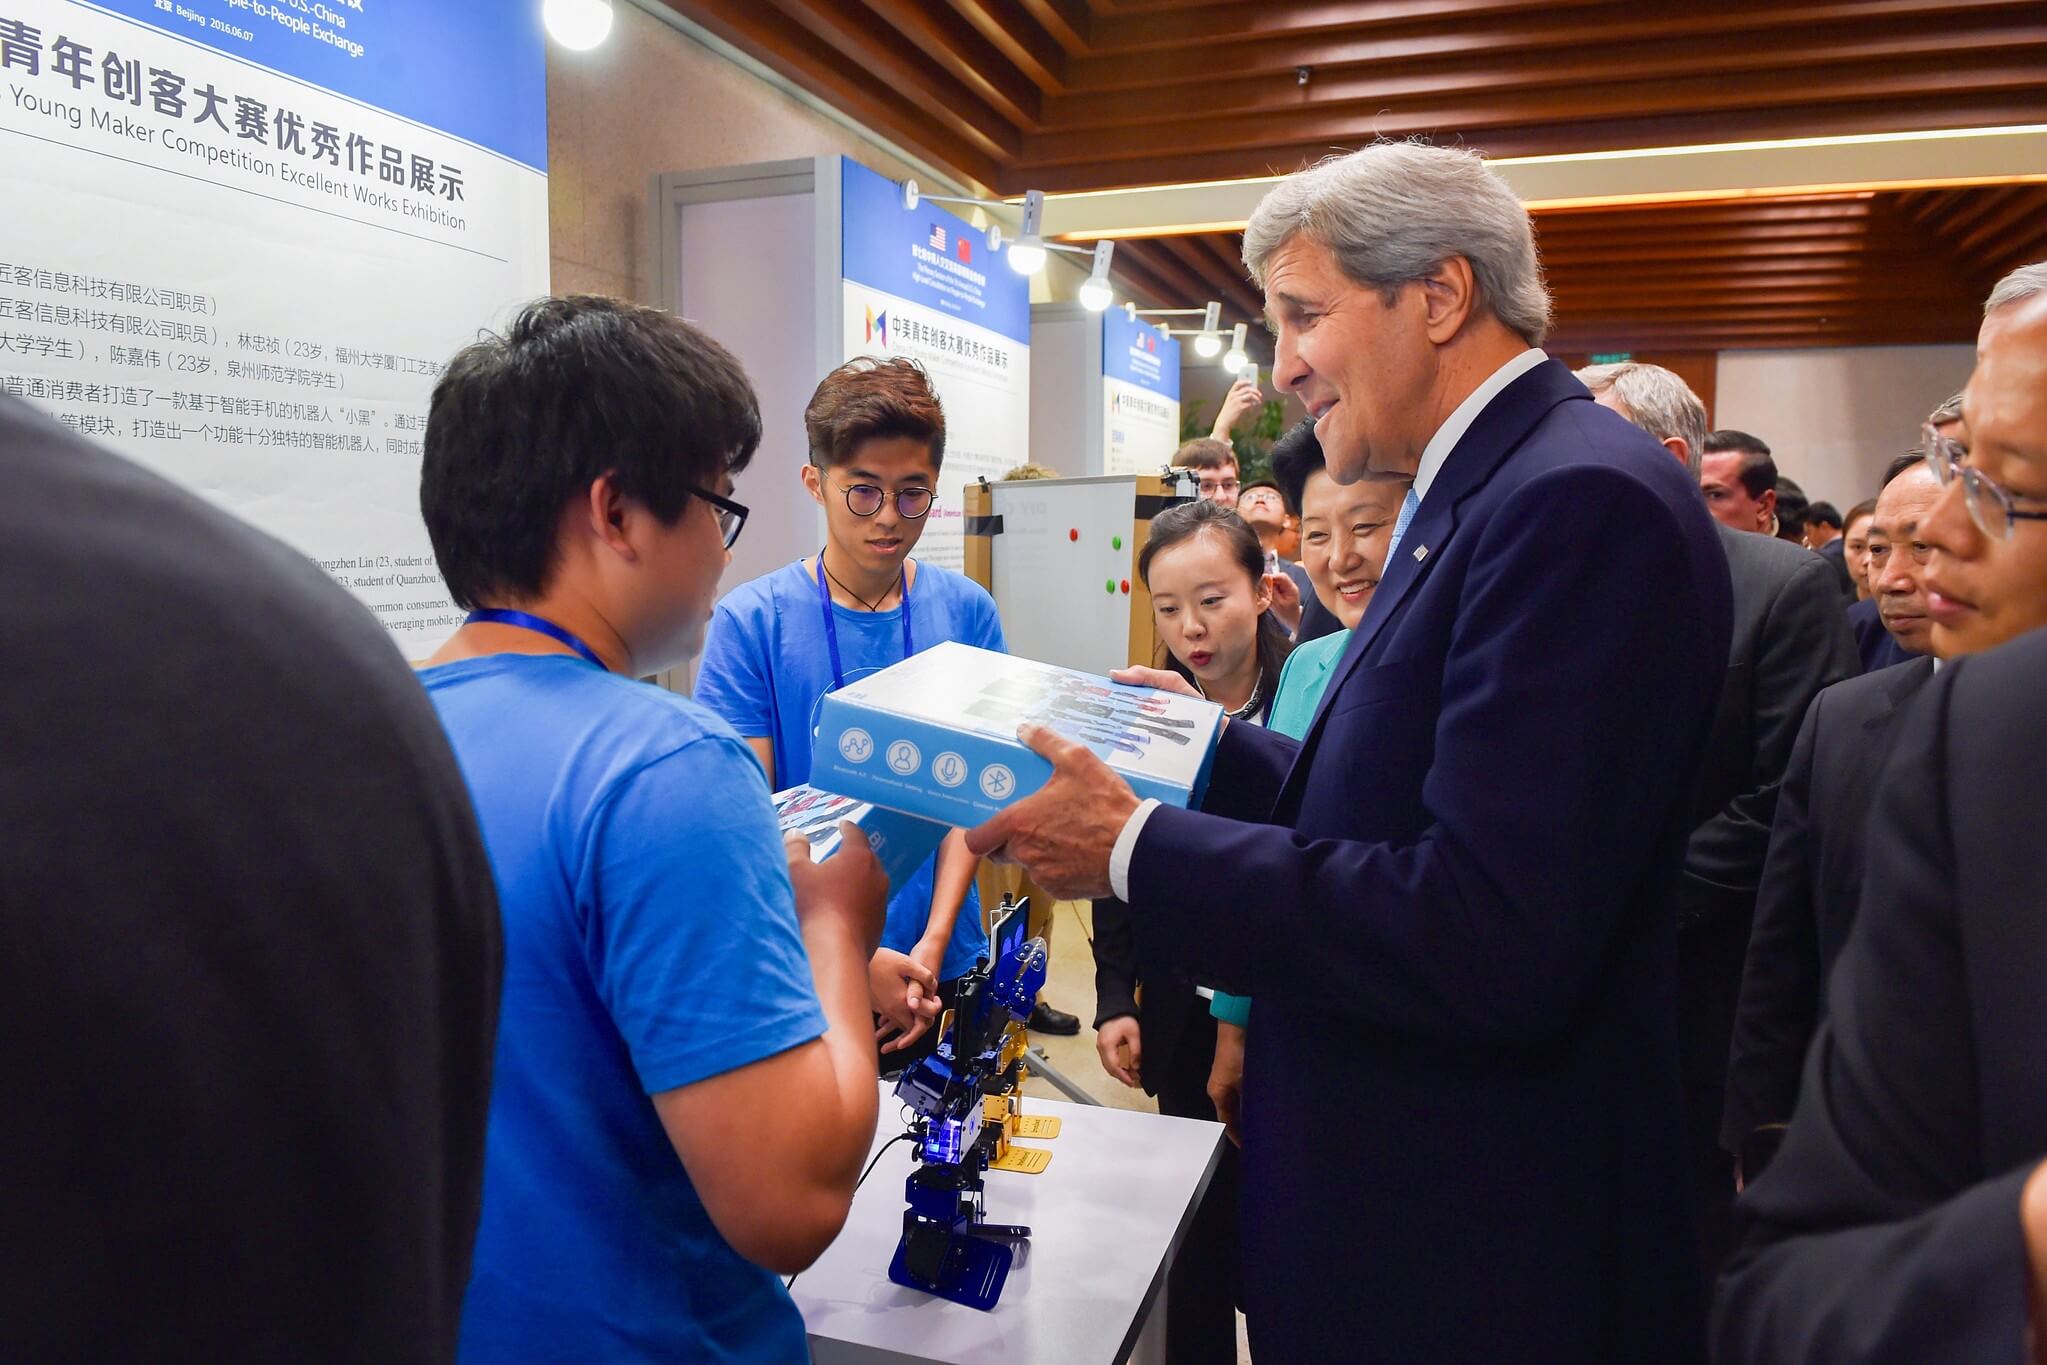 VanderLugt - Secretary of State John Kerry Looks at a Box Containing a Robot That Incorporates an iPhone Before a Meeting With Young Entrepreneurs in Beijing in 2016. US Department of State